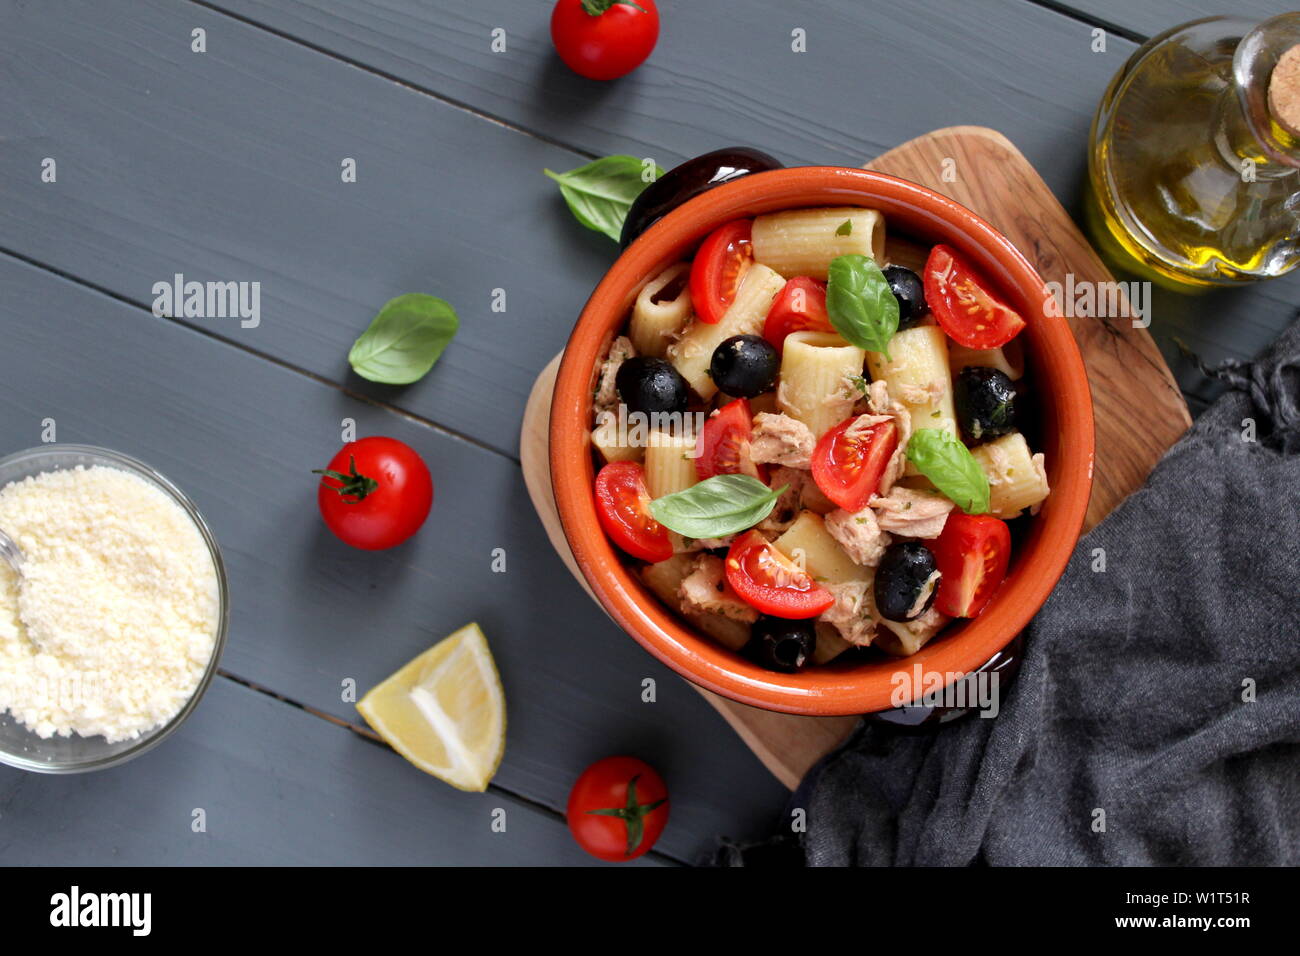 Pasta with tuna, tomato, black olive and parmesan cheese on dark background. Top view with copy space. Stock Photo